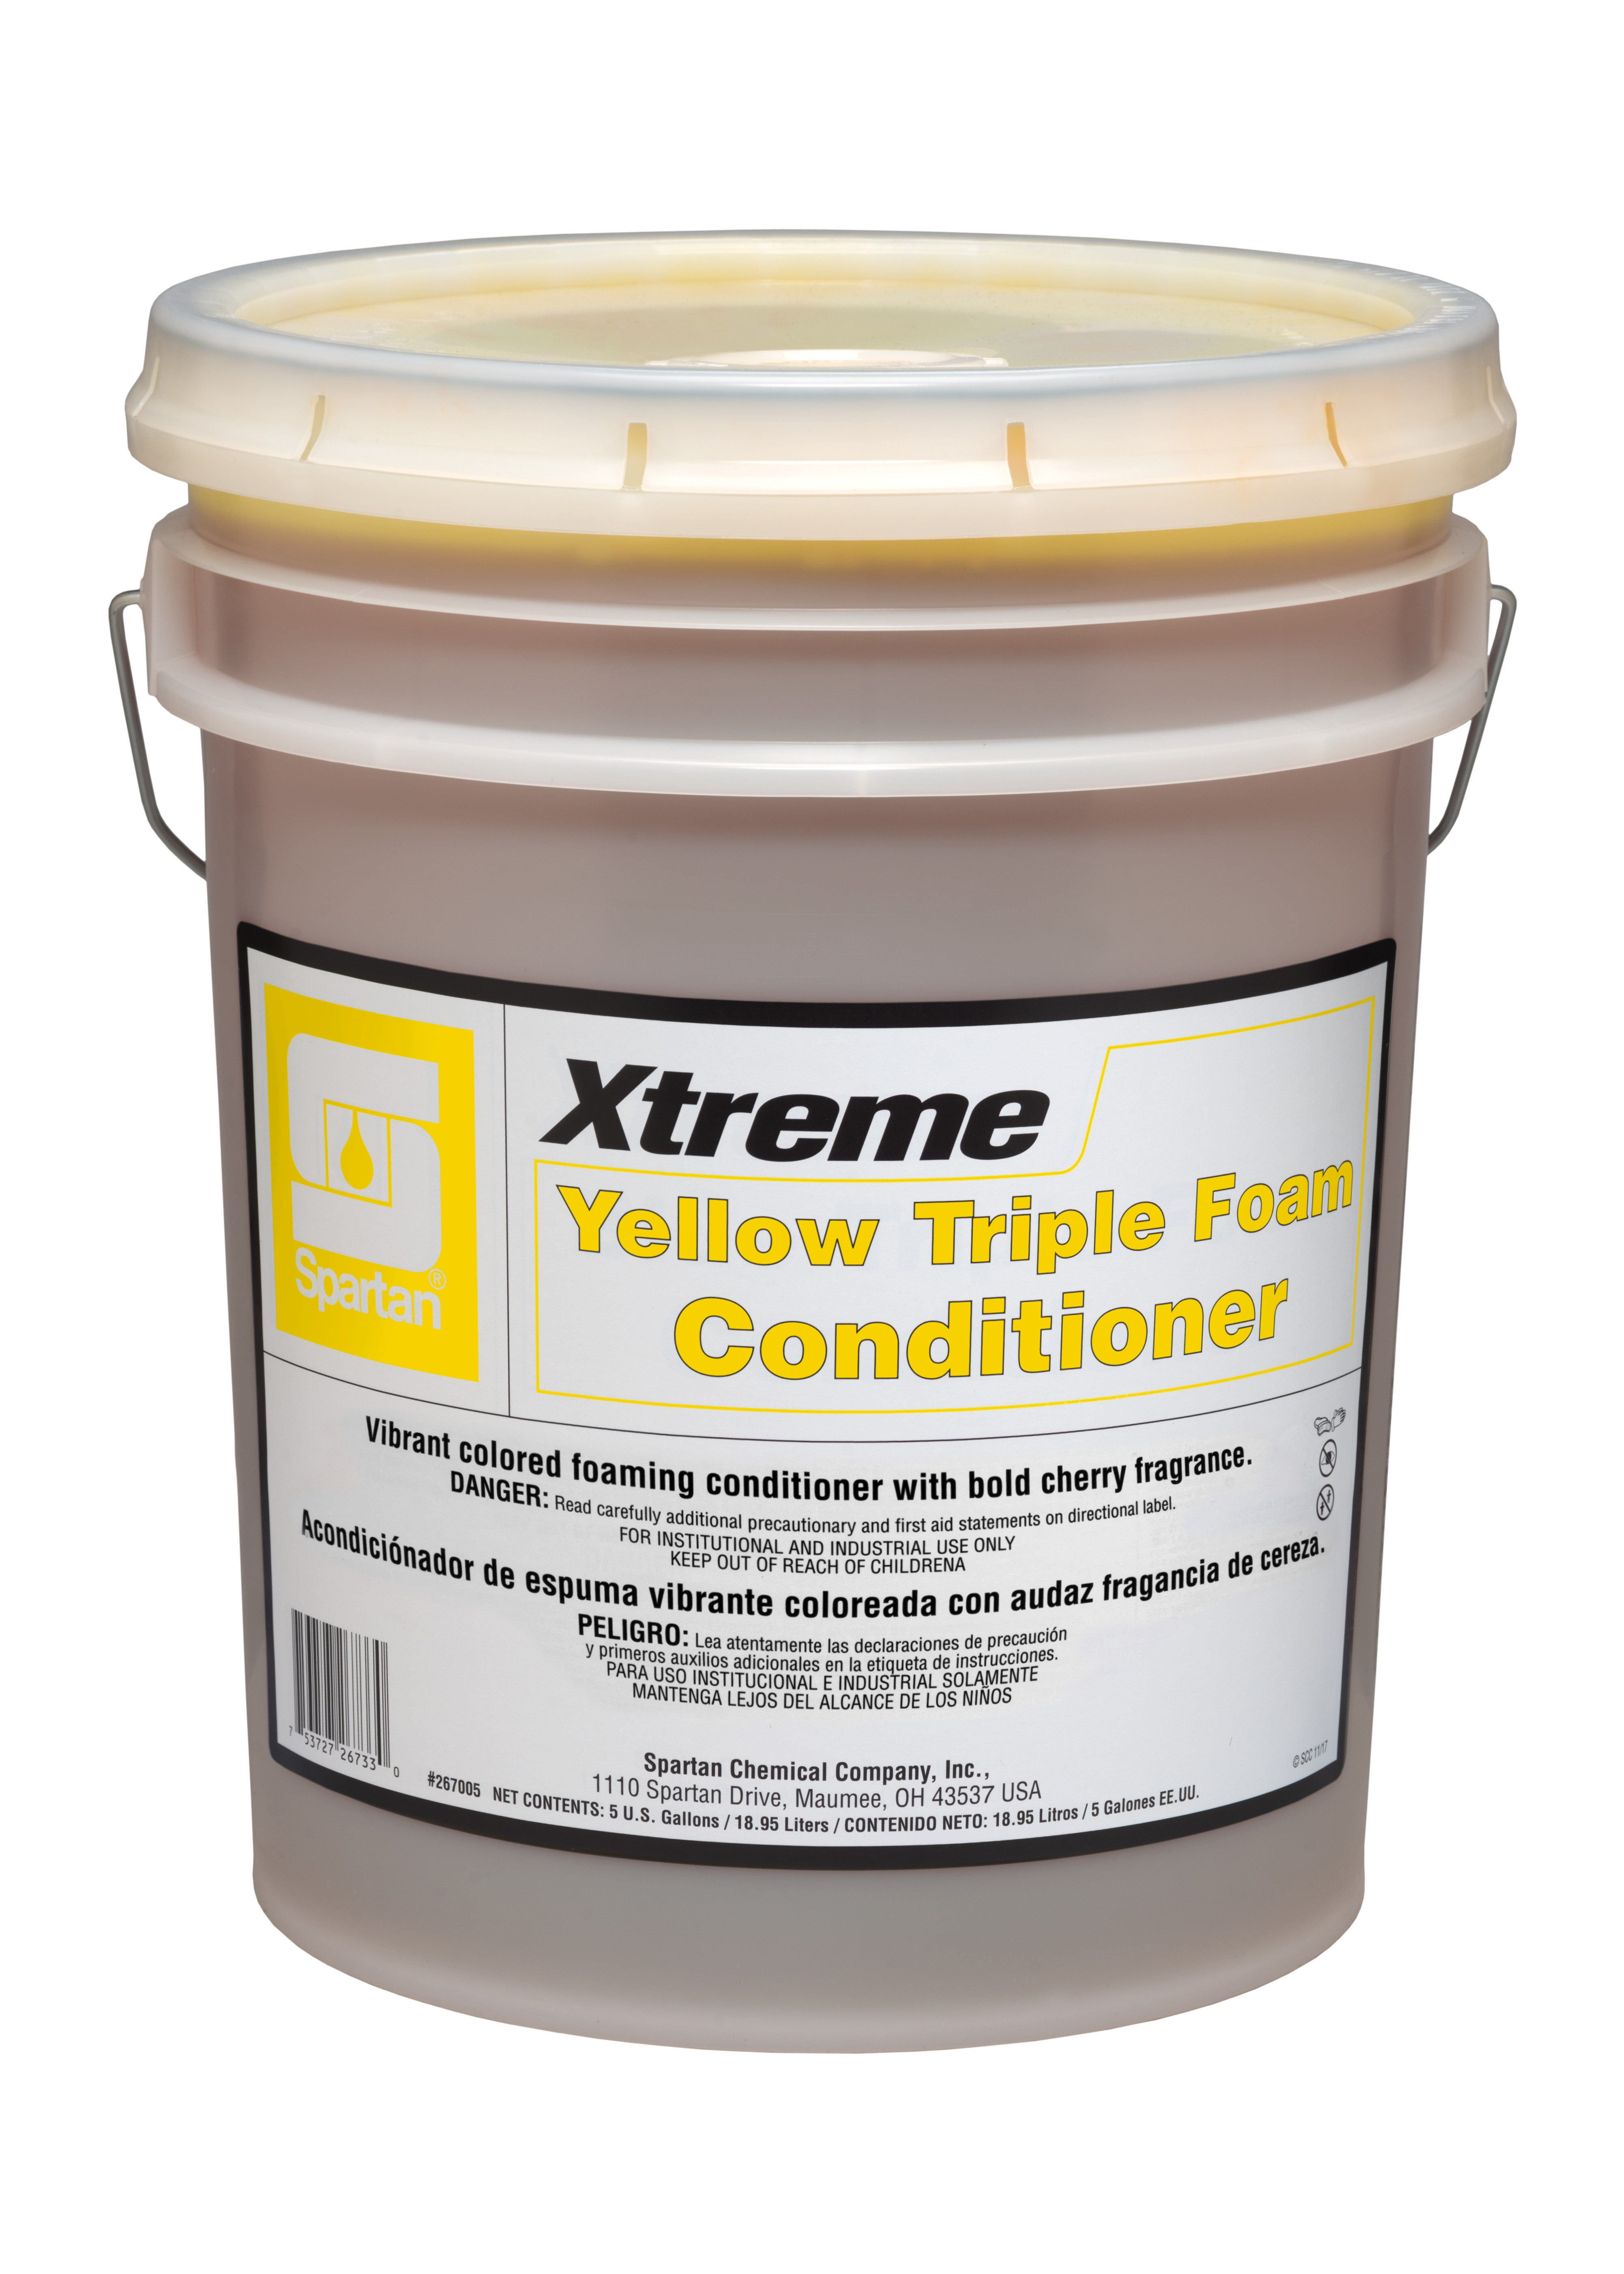 Spartan Chemical Company Xtreme Yellow Triple Foam Conditioner, 5 GAL PAIL